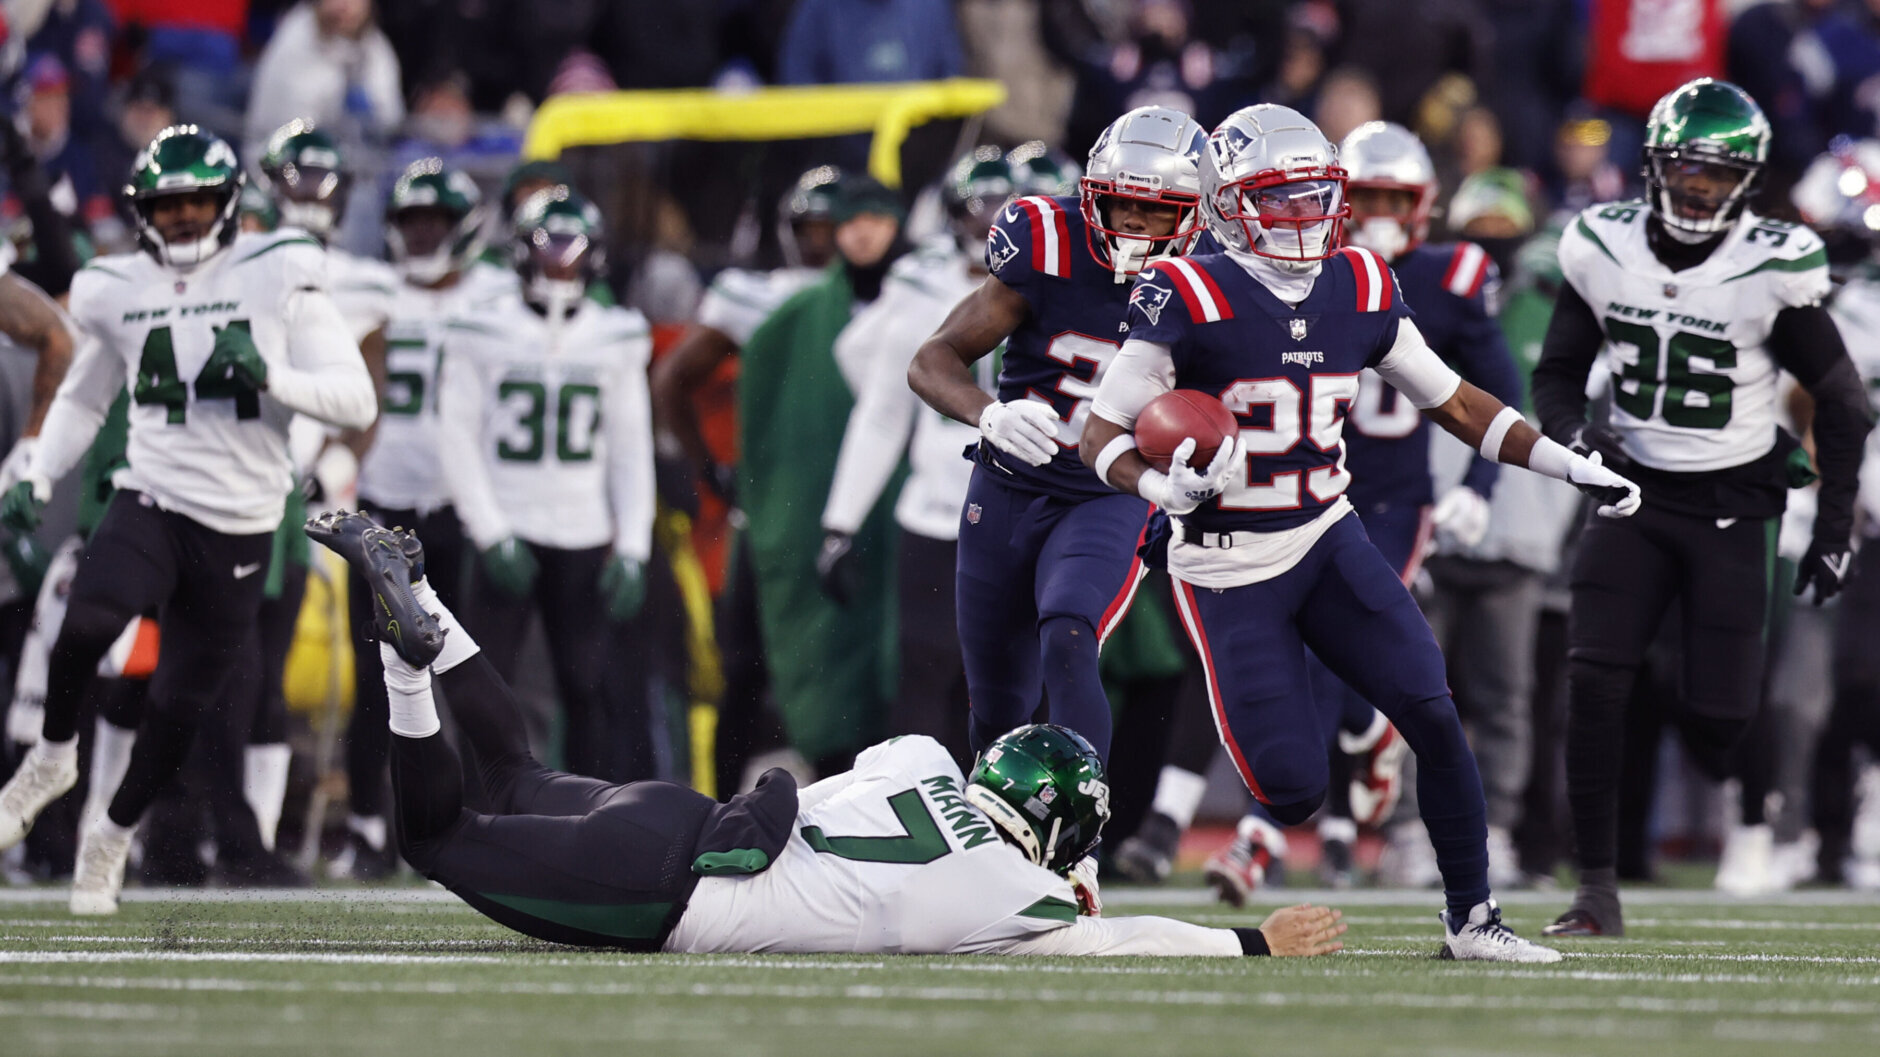 <p><b><i>Jets 3</i></b><br />
<b><i>Patriots 10</i></b></p>
<p>How did the New York Jets lose to New England for the 14th straight time? Having more punts (10) than completed passes (9) is a key component, especially when the last one was returned for <a href="https://twitter.com/ESPNStatsInfo/status/1594454549380857858?s=20&amp;t=B8R9YmnCNPcOgcJLMyLvNg" target="_blank" rel="noopener" data-saferedirecturl="https://www.google.com/url?q=https://twitter.com/ESPNStatsInfo/status/1594454549380857858?s%3D20%26t%3DB8R9YmnCNPcOgcJLMyLvNg&amp;source=gmail&amp;ust=1669080916134000&amp;usg=AOvVaw1Vneh5YcWr3mBqDt9bRFjC">a historic near-walk-off 84-yard touchdown</a>.</p>
<p>It also kicks off <a href="https://profootballtalk.nbcsports.com/2022/11/16/patriots-emerge-from-bye-with-three-key-games-in-12-days/" target="_blank" rel="noopener" data-saferedirecturl="https://www.google.com/url?q=https://profootballtalk.nbcsports.com/2022/11/16/patriots-emerge-from-bye-with-three-key-games-in-12-days/&amp;source=gmail&amp;ust=1669080916134000&amp;usg=AOvVaw2PGUIFsOEARU8PxJrrJsRI">the Patriots&#8217; key 12-day stretch of three games</a> that will determine whether there will be playoff football in Foxborough this year. Bank on the Pats going 2-1 during that window.</p>
